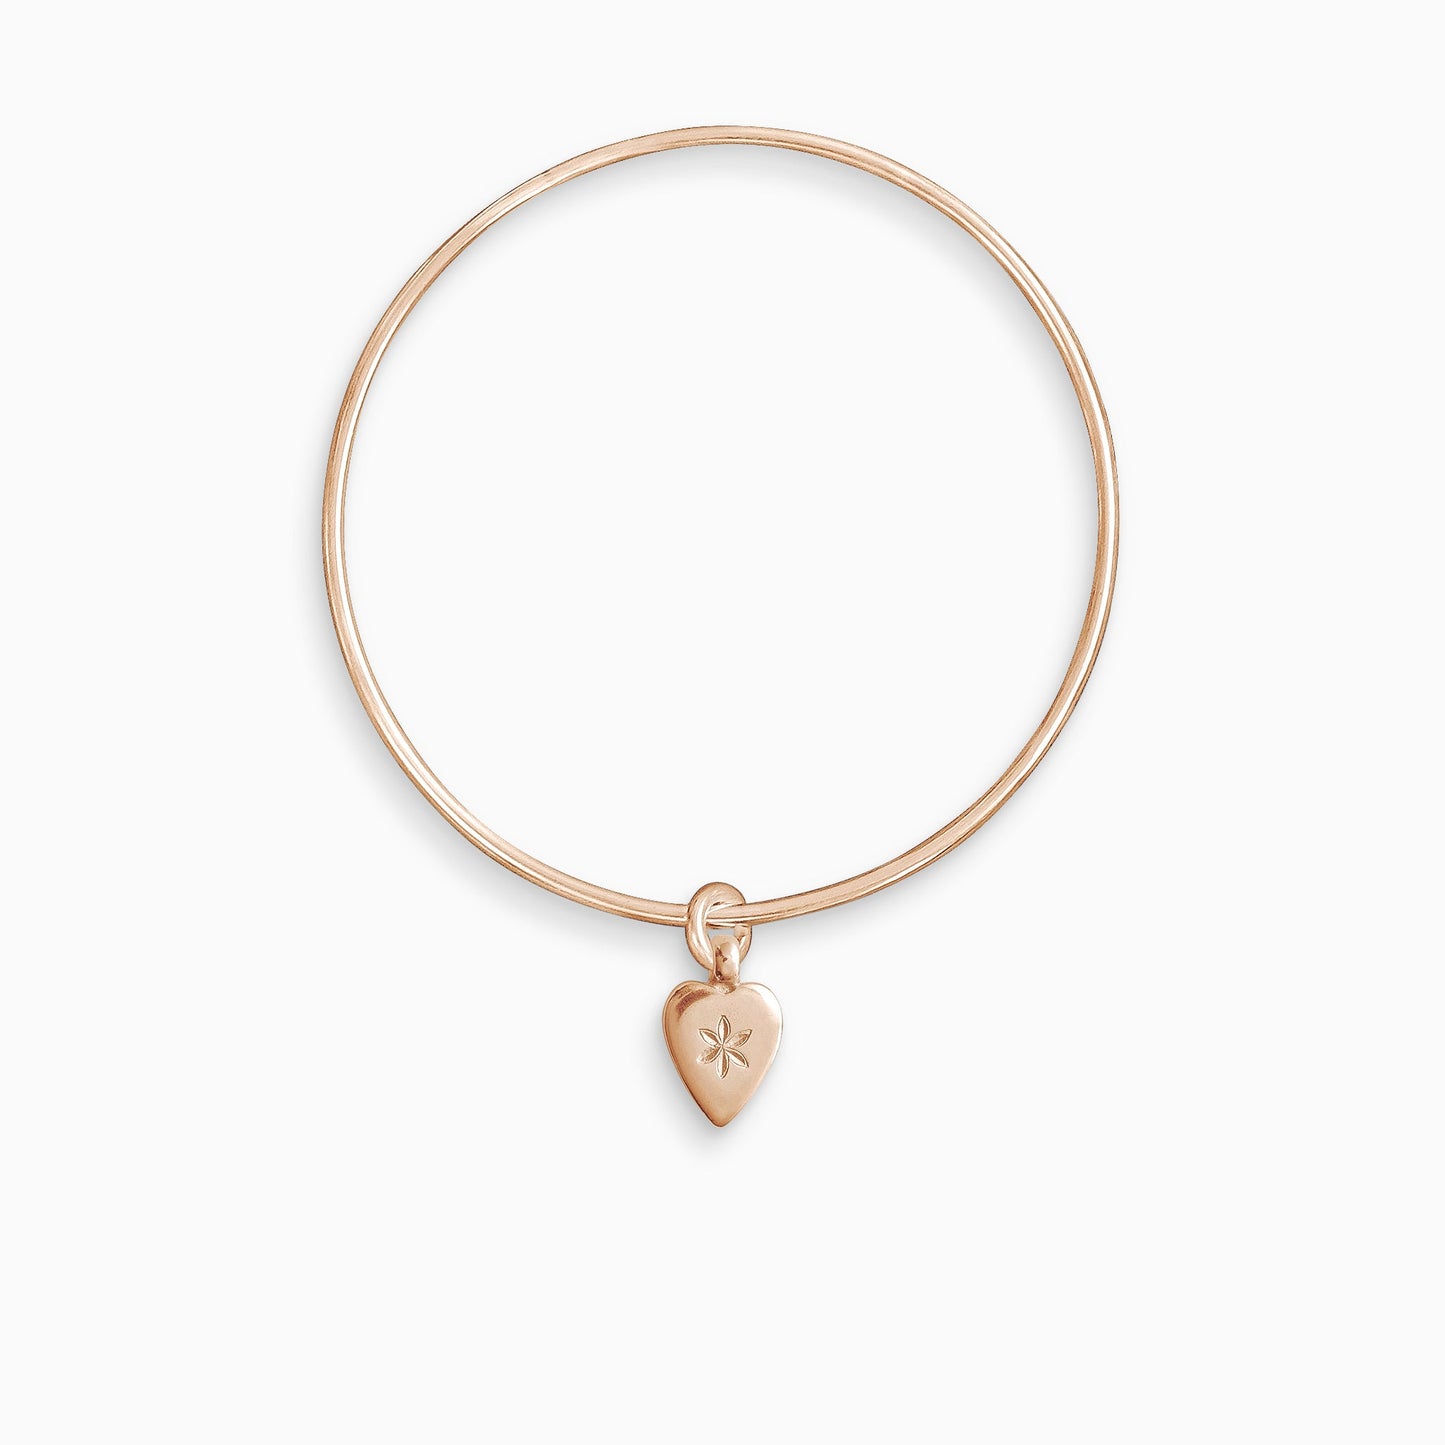 An 18ct Fairtrade rose gold smooth heart shaped charm engraved with a 6 petal flower, freely moving on a round wire bangle. Charm 15mm x 8mm. Bangle 63mm inside diameter x 2mm round wire.